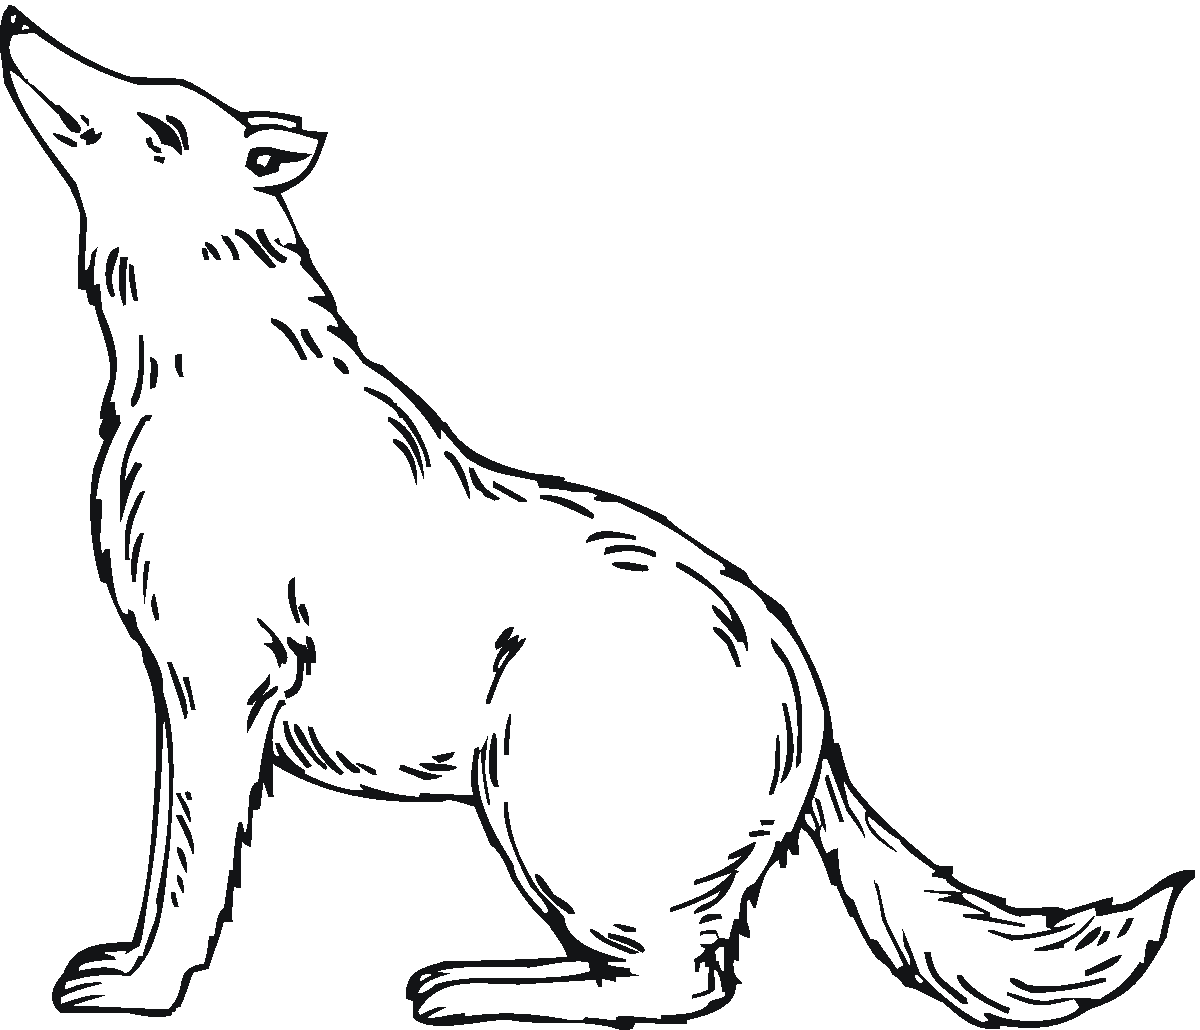 balto howling coloring pages